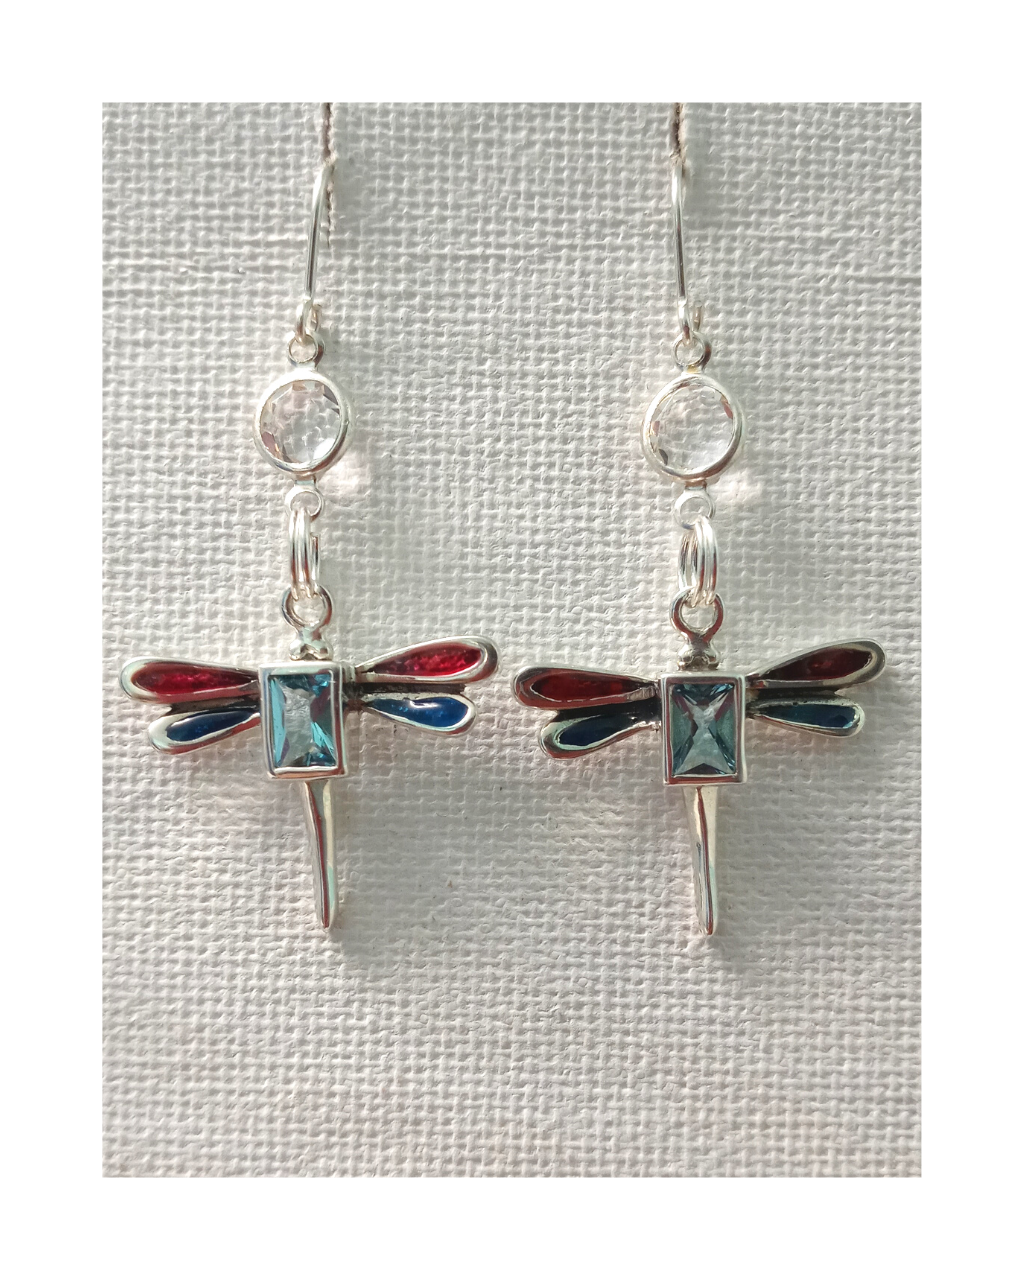 Exclusive Colorful Sterling Hand-enameled Dragonfly with Faceted Blue Topaz and Clear Swarovski Crystal Earrings